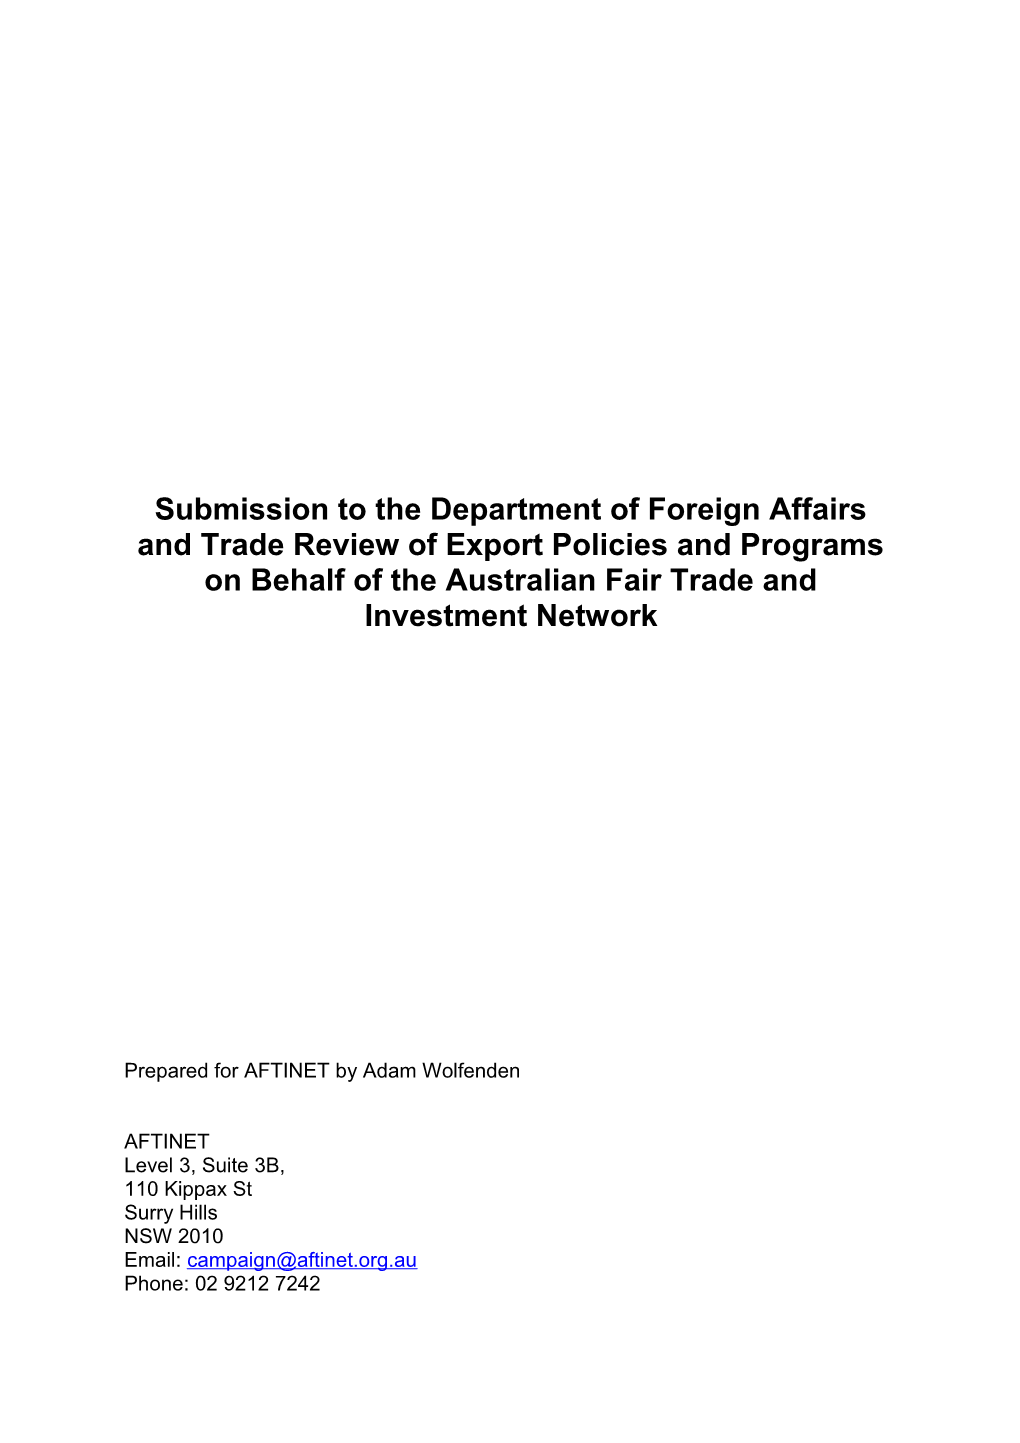 Submission to the Department of Foreign Affairs and Trade Review of Export Policies And